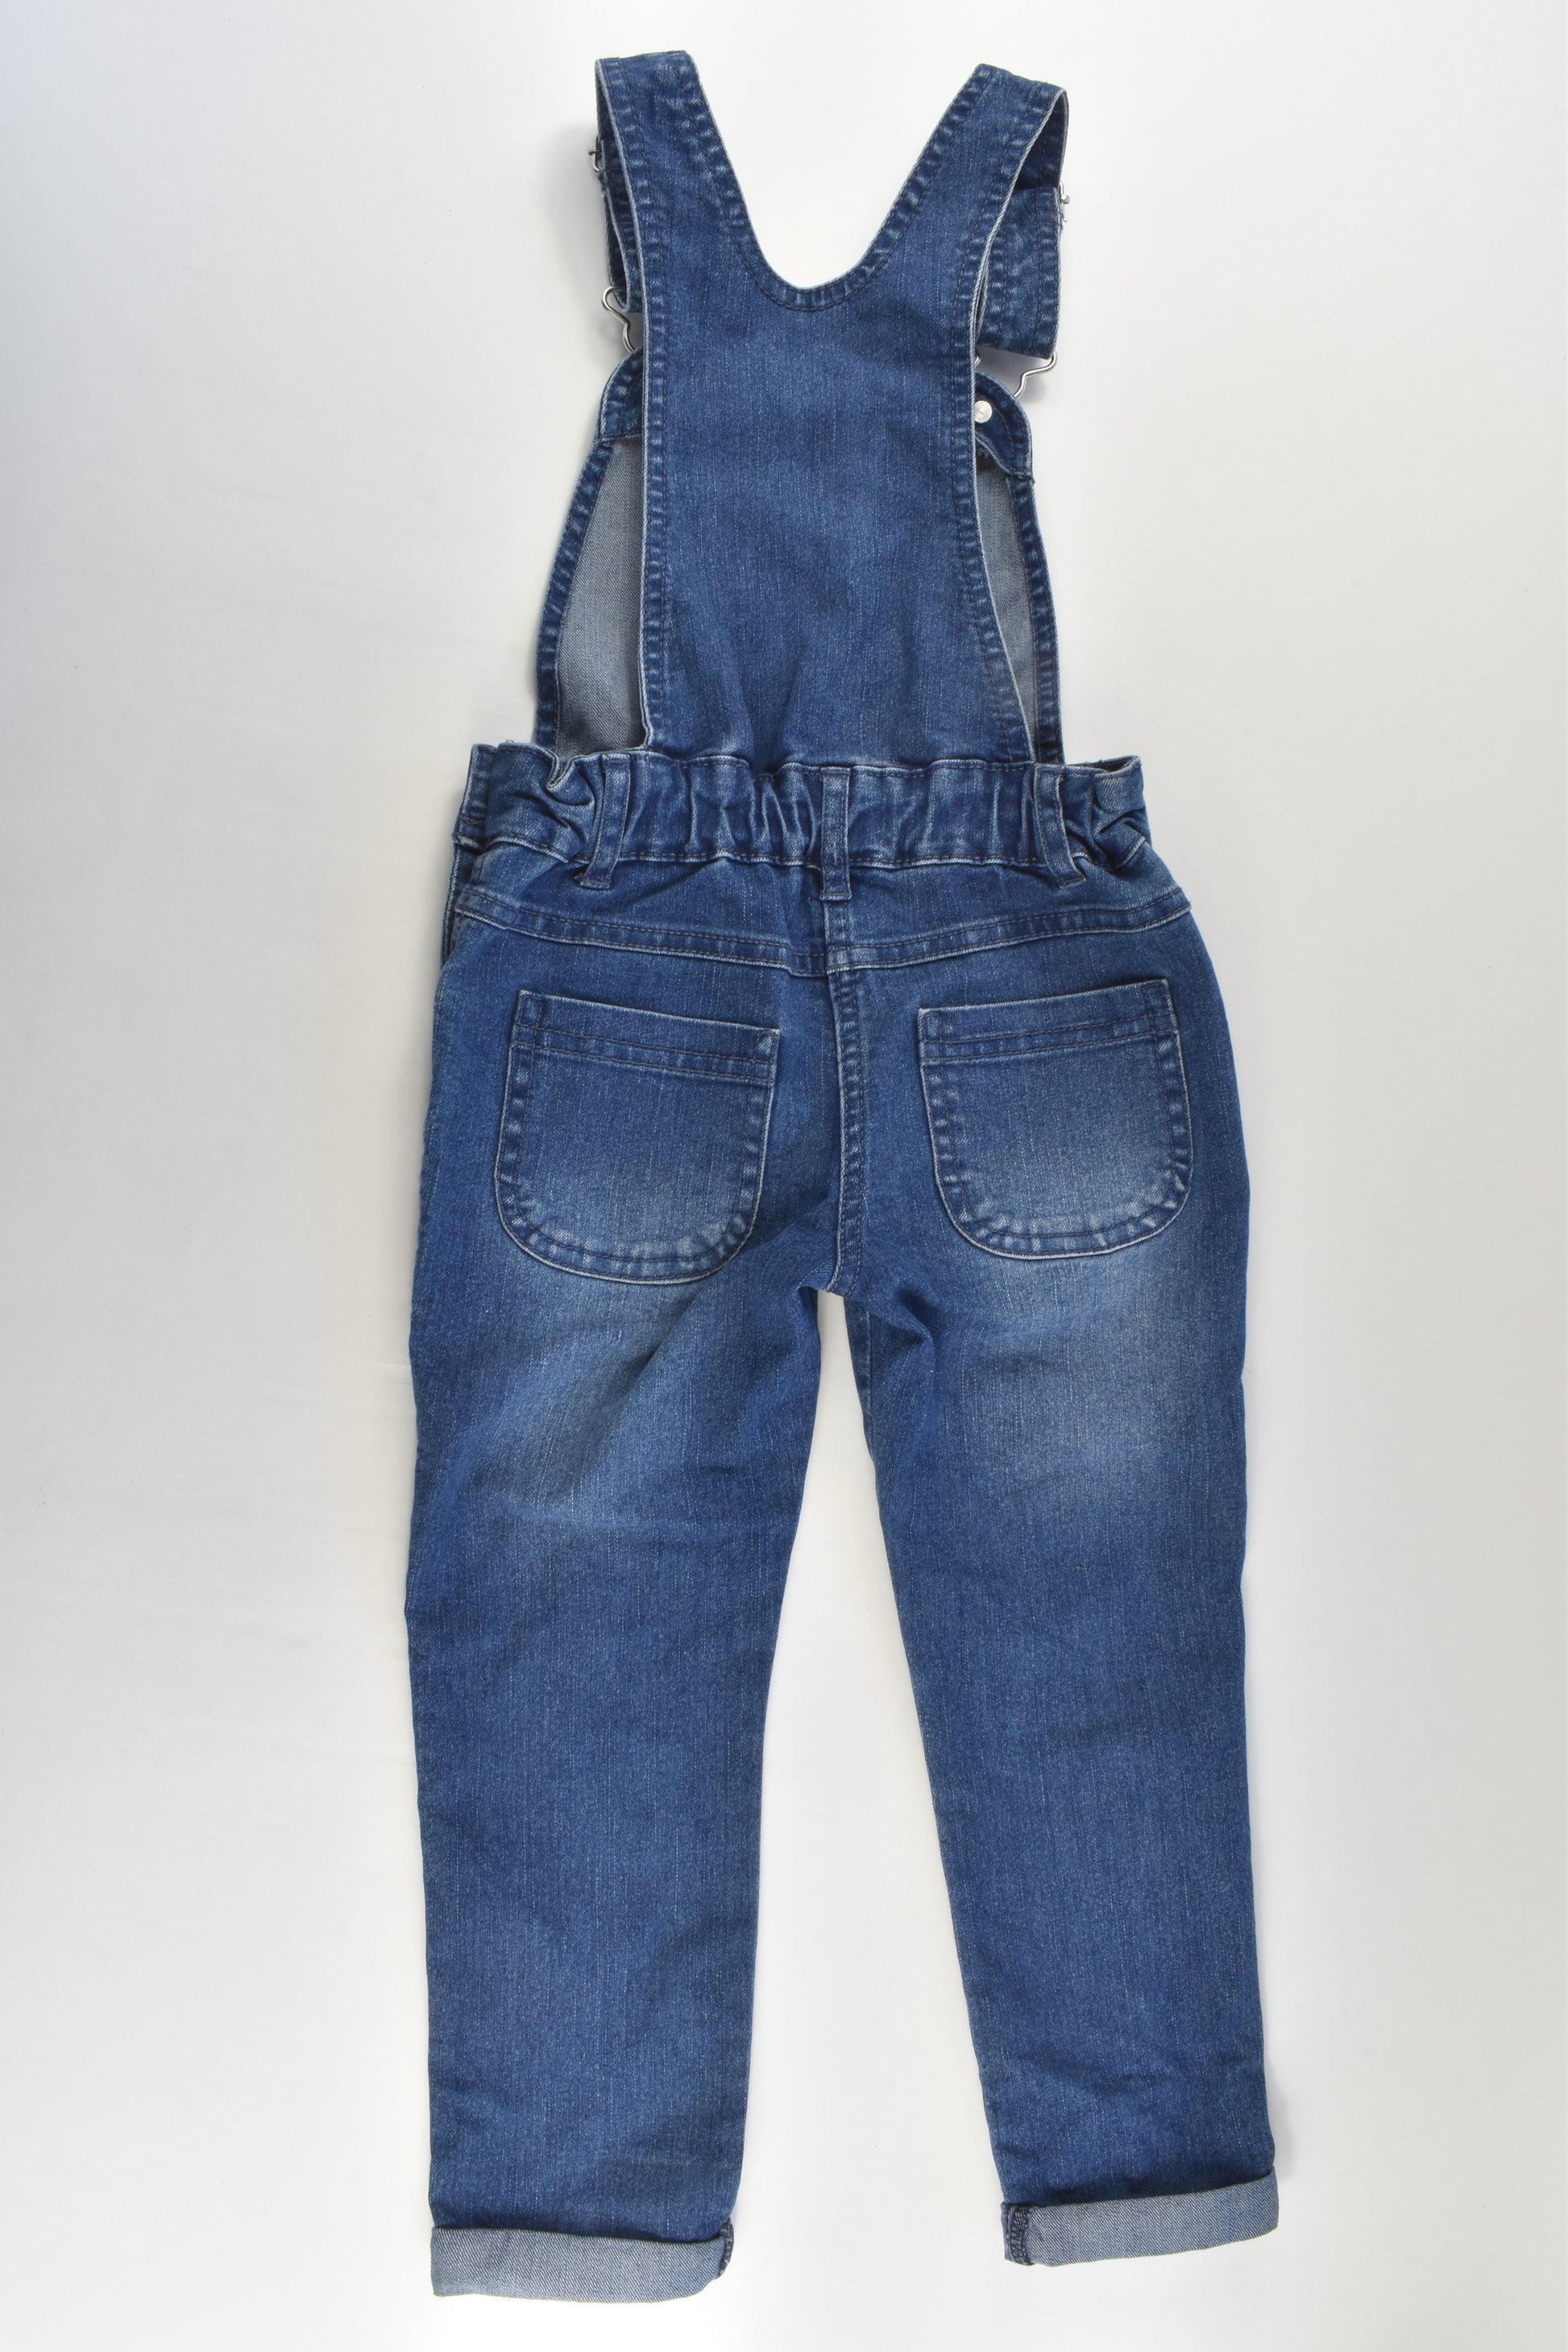 H&T Size 4 Stretchy Denim Overalls